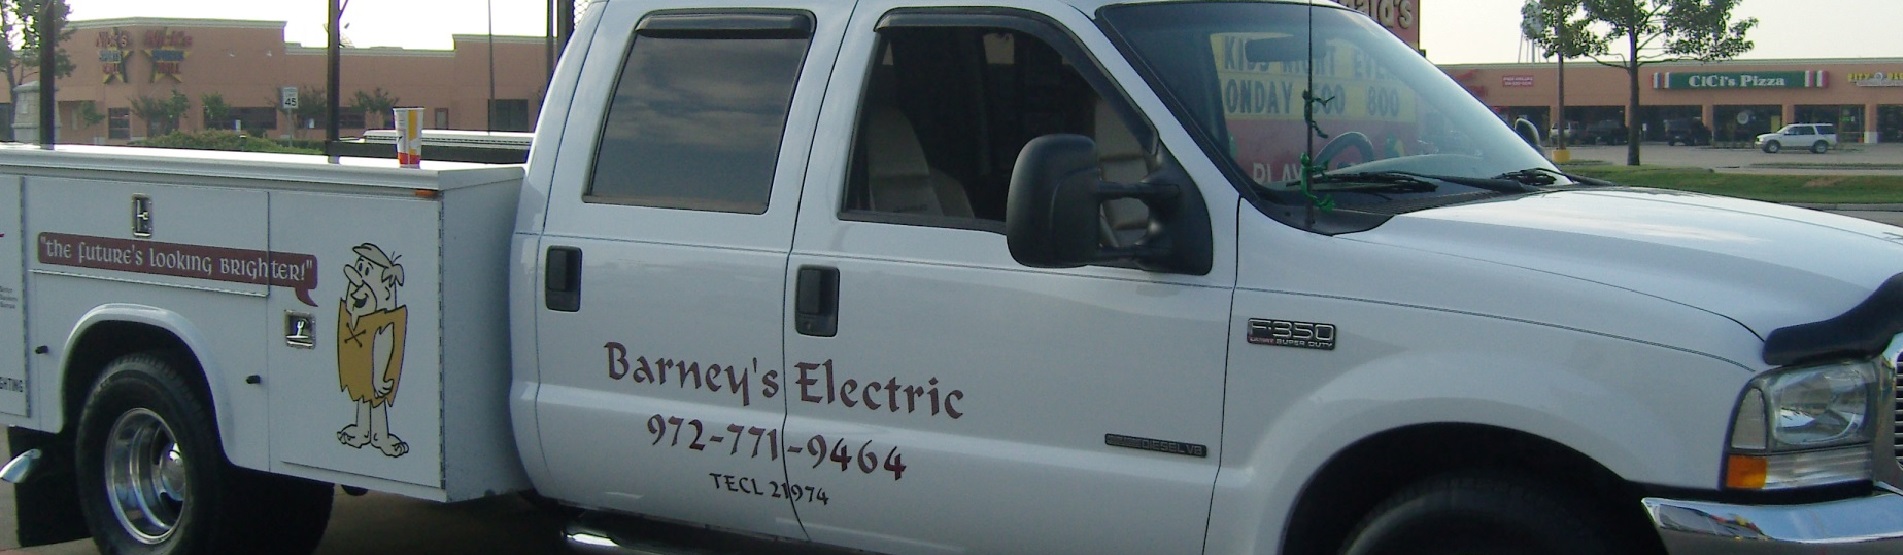 Electrician Royse City TX Barney's Electric Full Service Electrician Residential Commercial Retail and New Construction Wiring Repair Installation Service 24 Hour Emergency Services Master Electrician Rockwall Texas